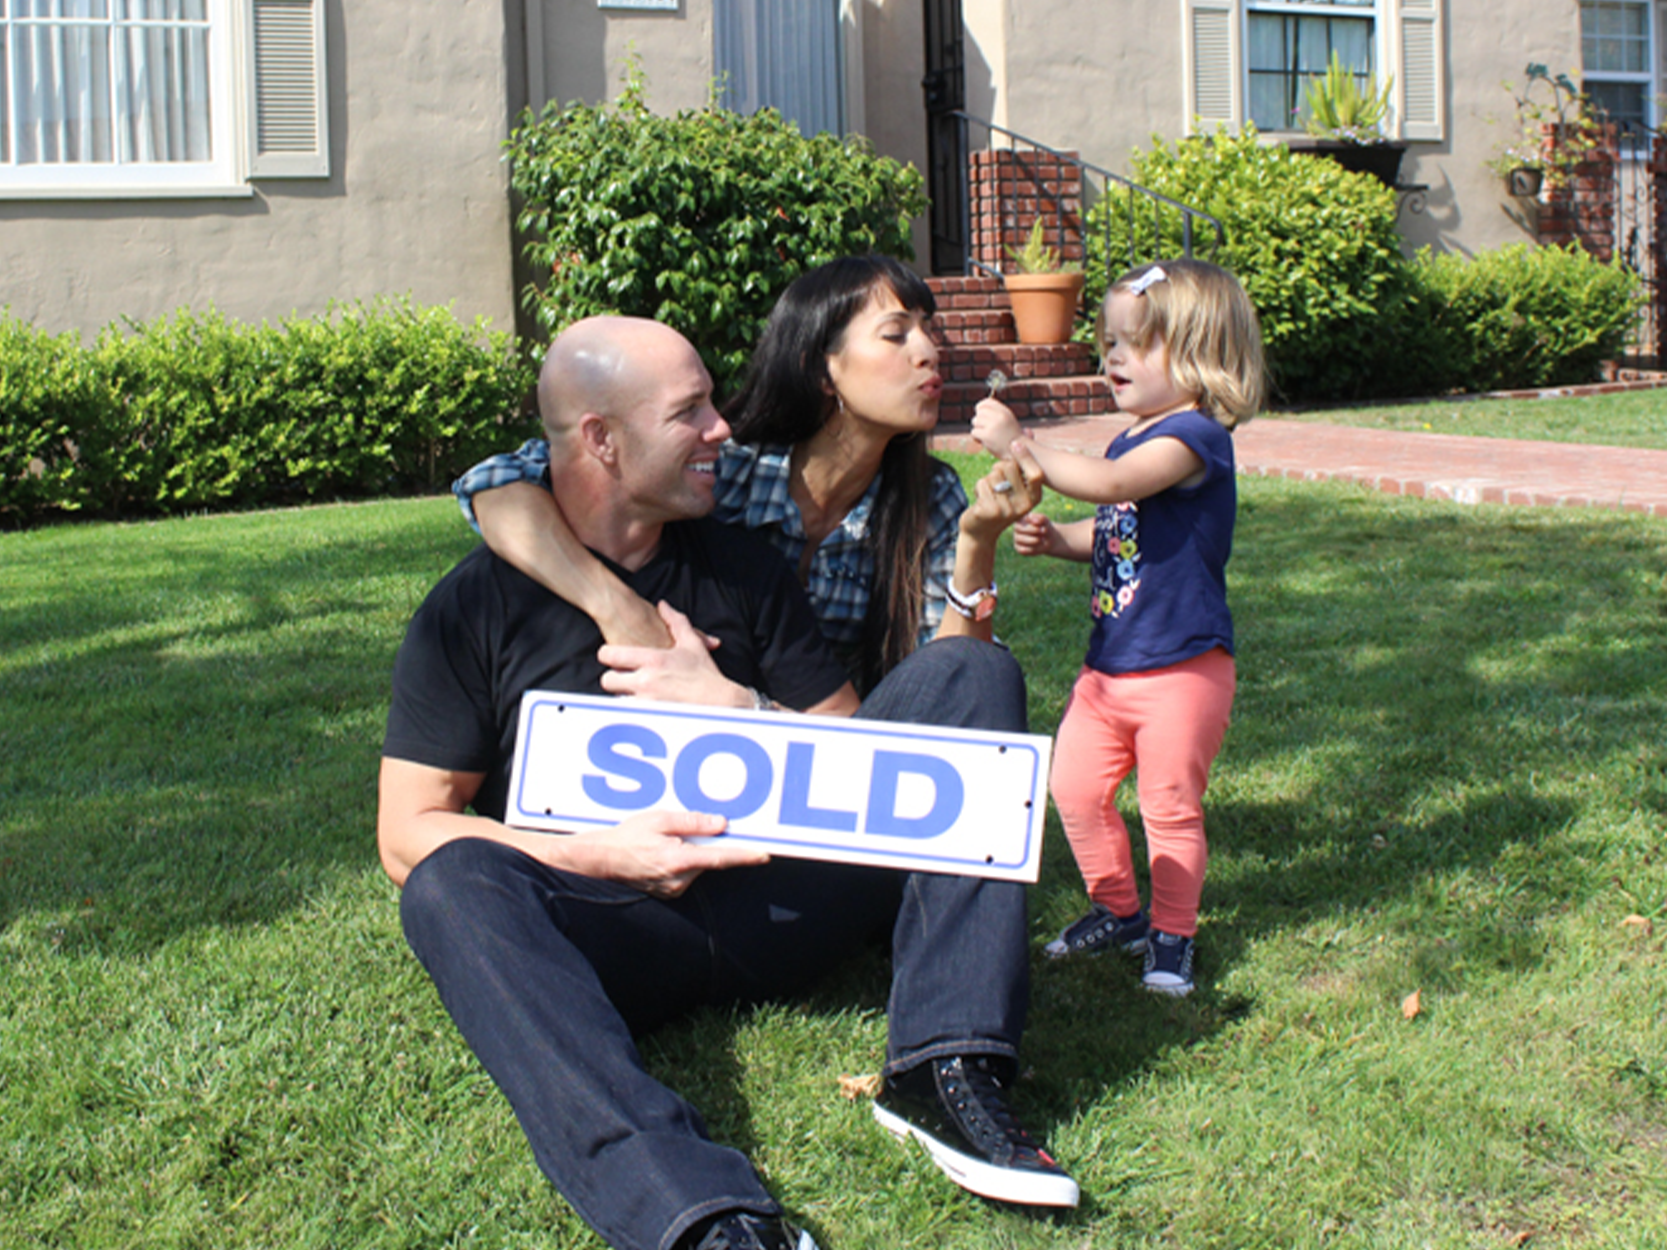 A family sits in their front yard, holding a "sold" sign